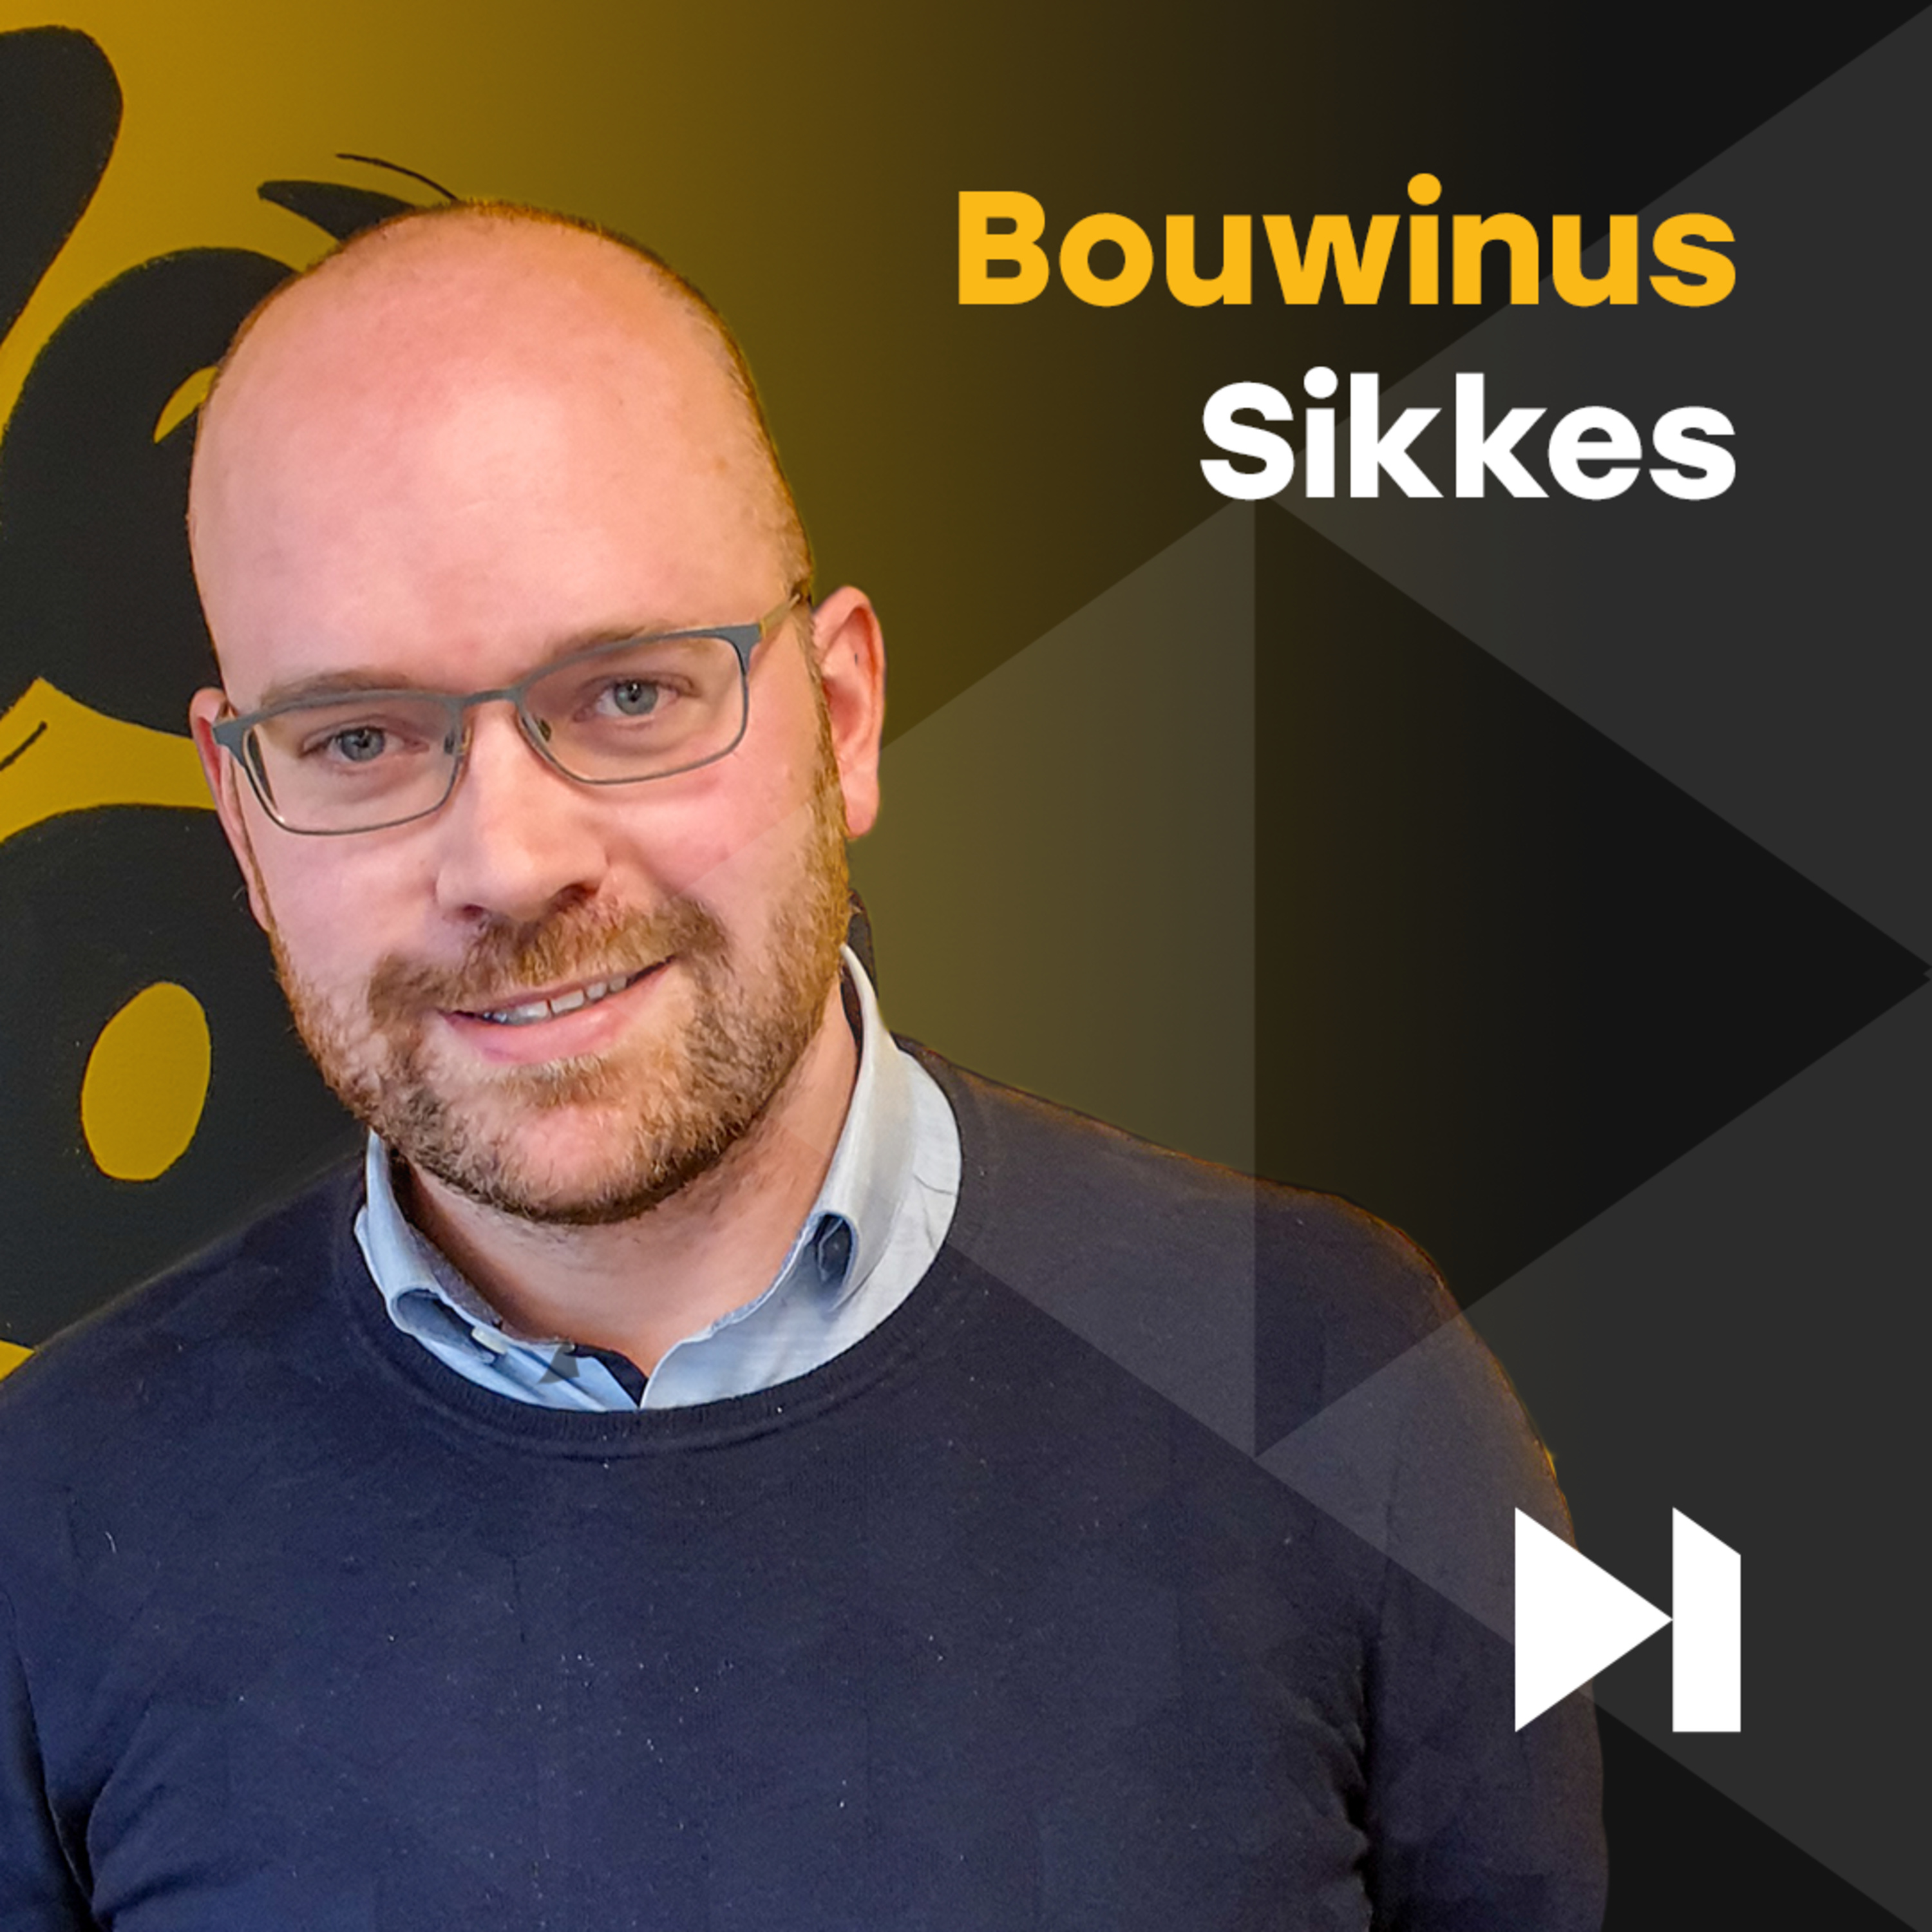 Bouwinus Sikkes over zijn Burn-out